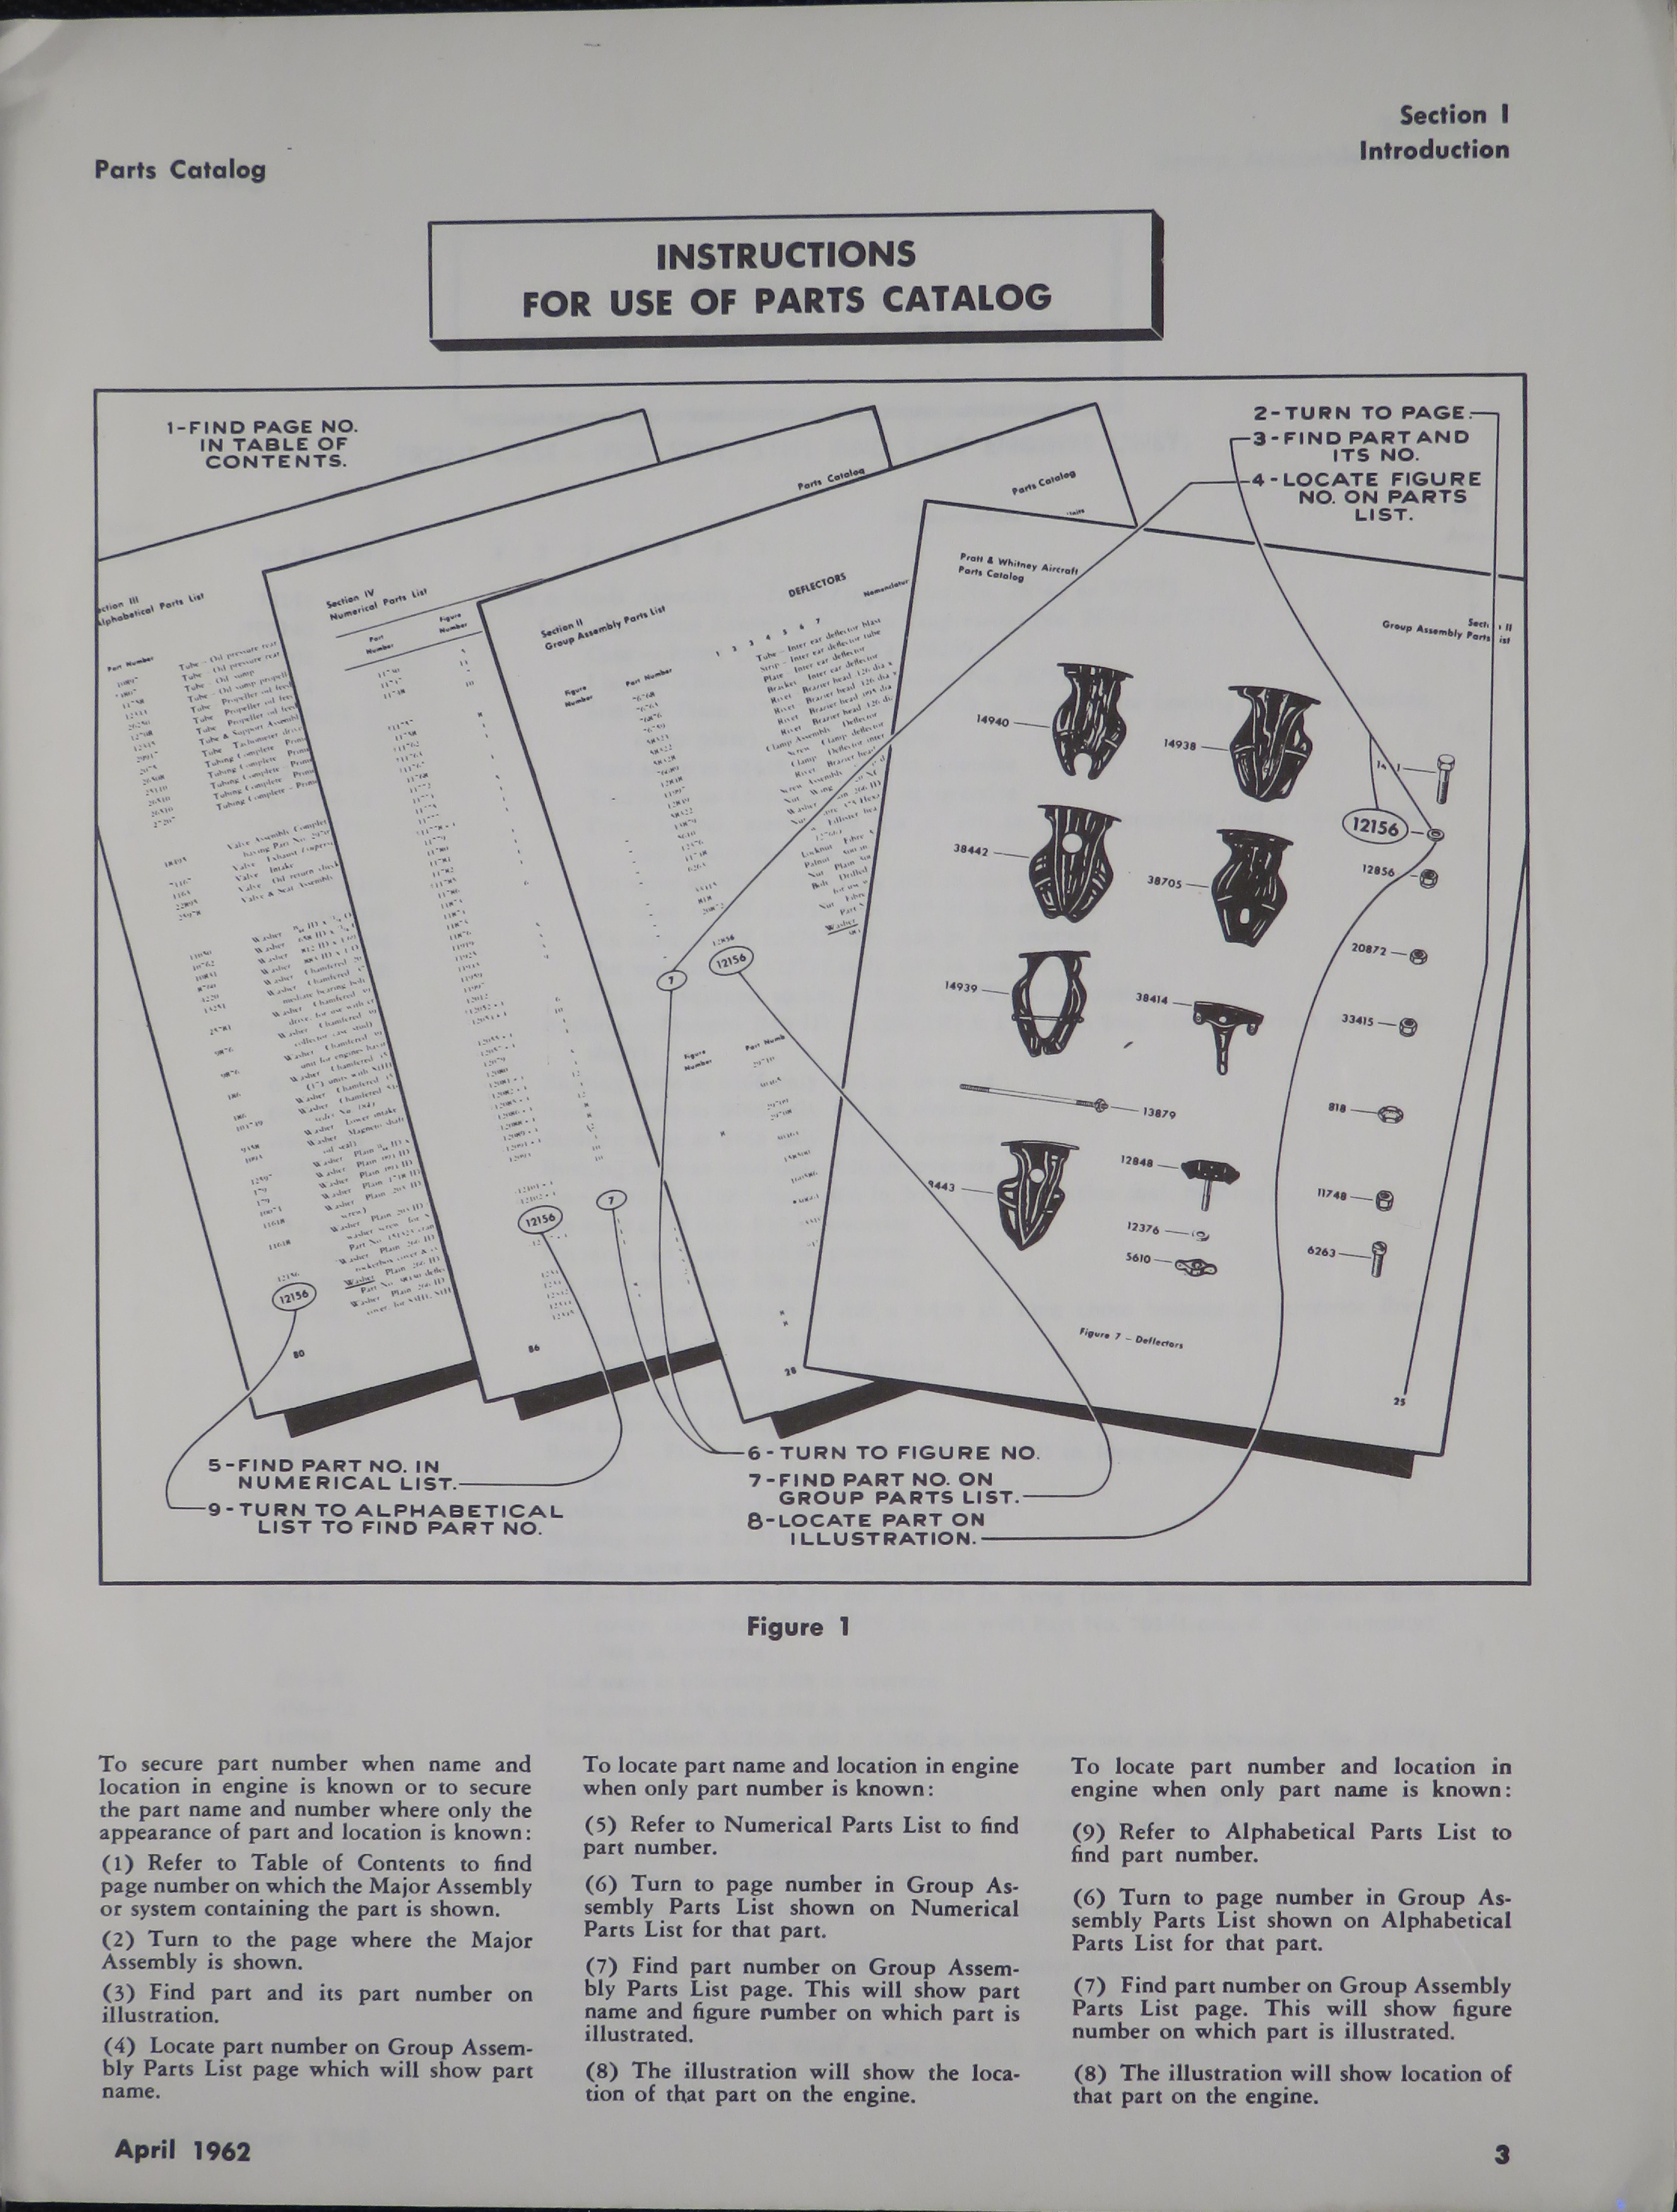 Sample page 9 from AirCorps Library document: Illustrated Parts Catalog for R-1340 Wasp Series Engines